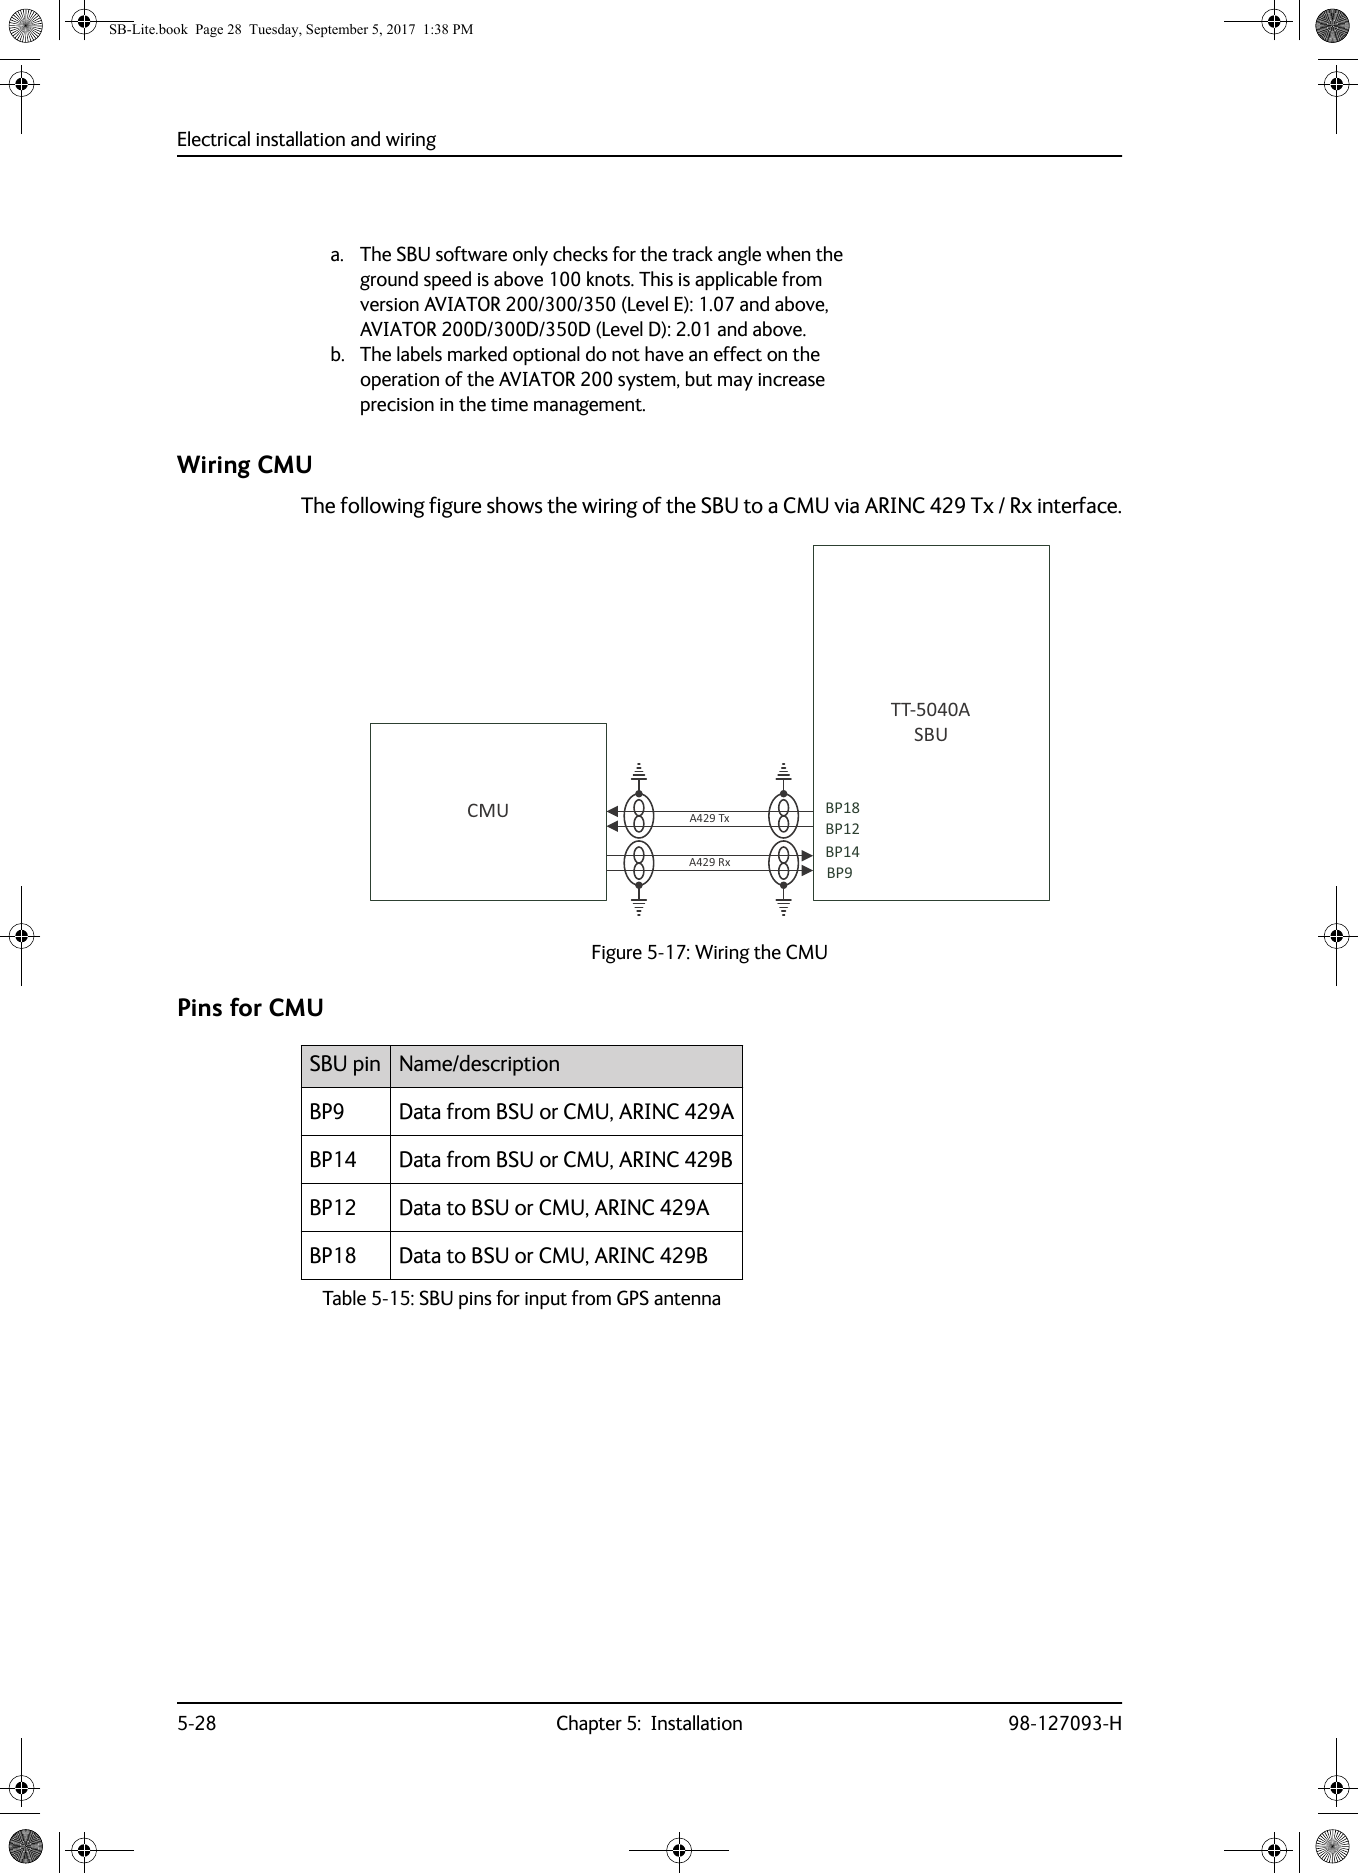 Electrical installation and wiring5-28 Chapter 5:  Installation 98-127093-HWiring CMUThe following figure shows the wiring of the SBU to a CMU via ARINC 429 Tx / Rx interface.Figure 5-17:  Wiring the CMUPins for CMUa. The SBU software only checks for the track angle when the ground speed is above 100  knots. This is applicable from version AVIATOR 200/300/350 (Level E): 1.07 and above, AVIATOR 200D/300D/350D (Level D): 2.01 and above.b. The labels marked optional do not have an effect on the operation of the AVIATOR 200 system, but may increase precision in the time management.ddͲϱϬϰϬ^hDh ϰϮϵdǆWϭϴWϭϮWϭϰWϵϰϮϵZǆSBU pin Name/descriptionBP9 Data from BSU or CMU, ARINC 429ABP14 Data from BSU or CMU, ARINC 429BBP12 Data to BSU or CMU, ARINC 429ABP18 Data to BSU or CMU, ARINC 429BTable 5-15:  SBU pins for input from GPS antennaSB-Lite.book  Page 28  Tuesday, September 5, 2017  1:38 PM